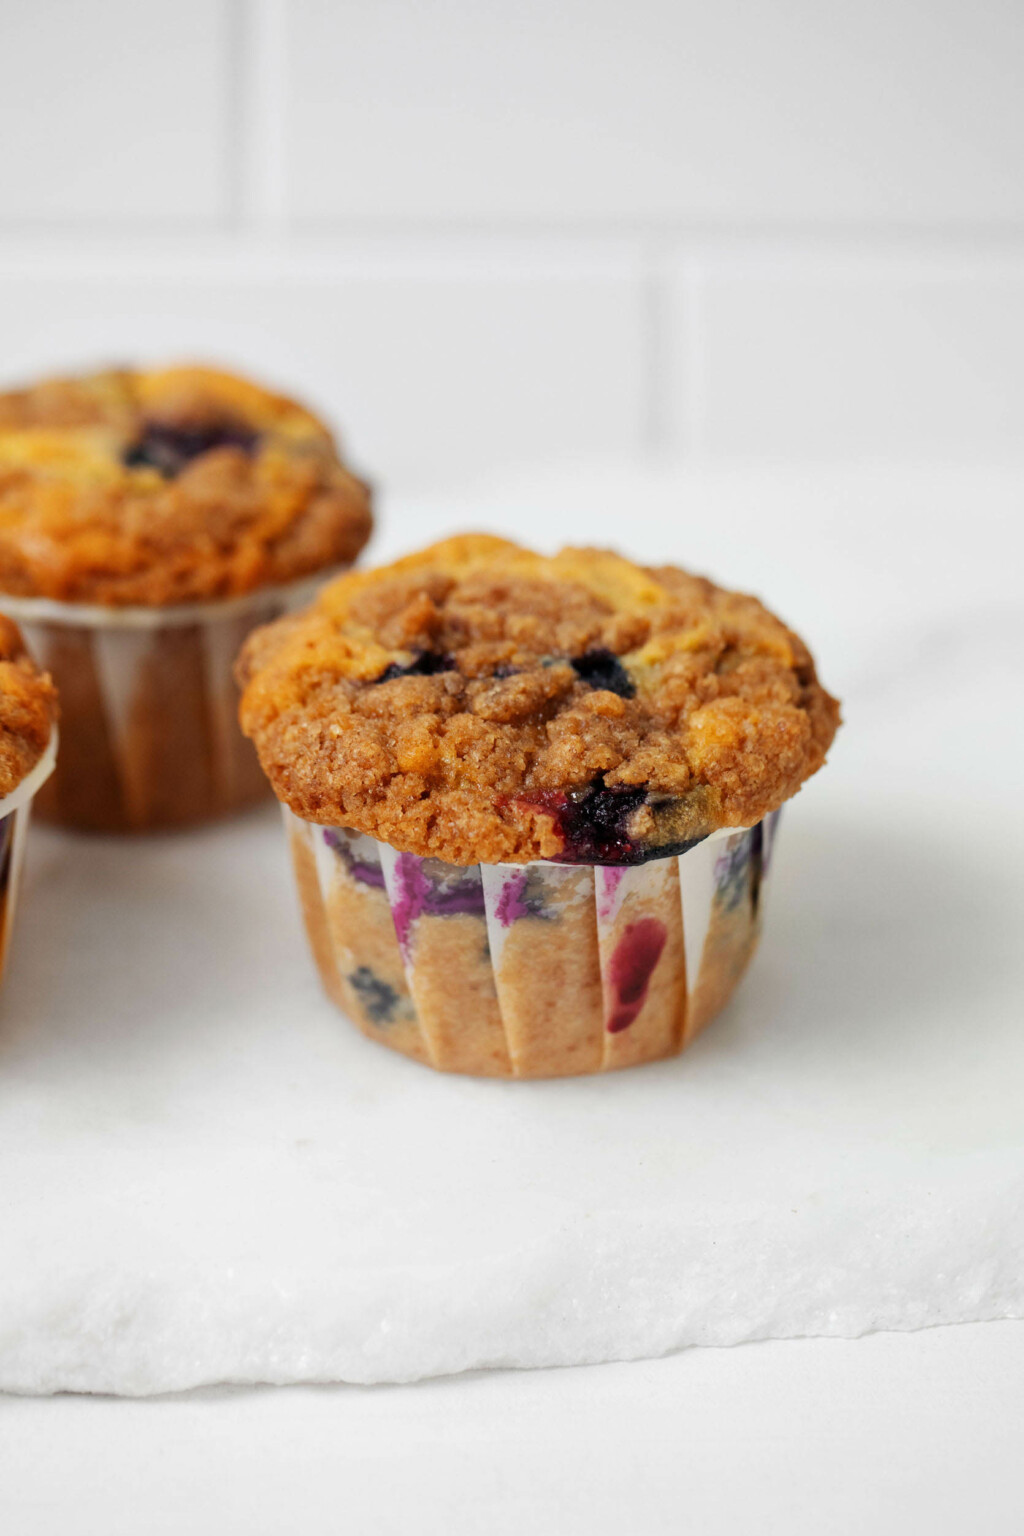 Vegan blueberry crumb muffins are resting on a white surface against a white tile backdrop.